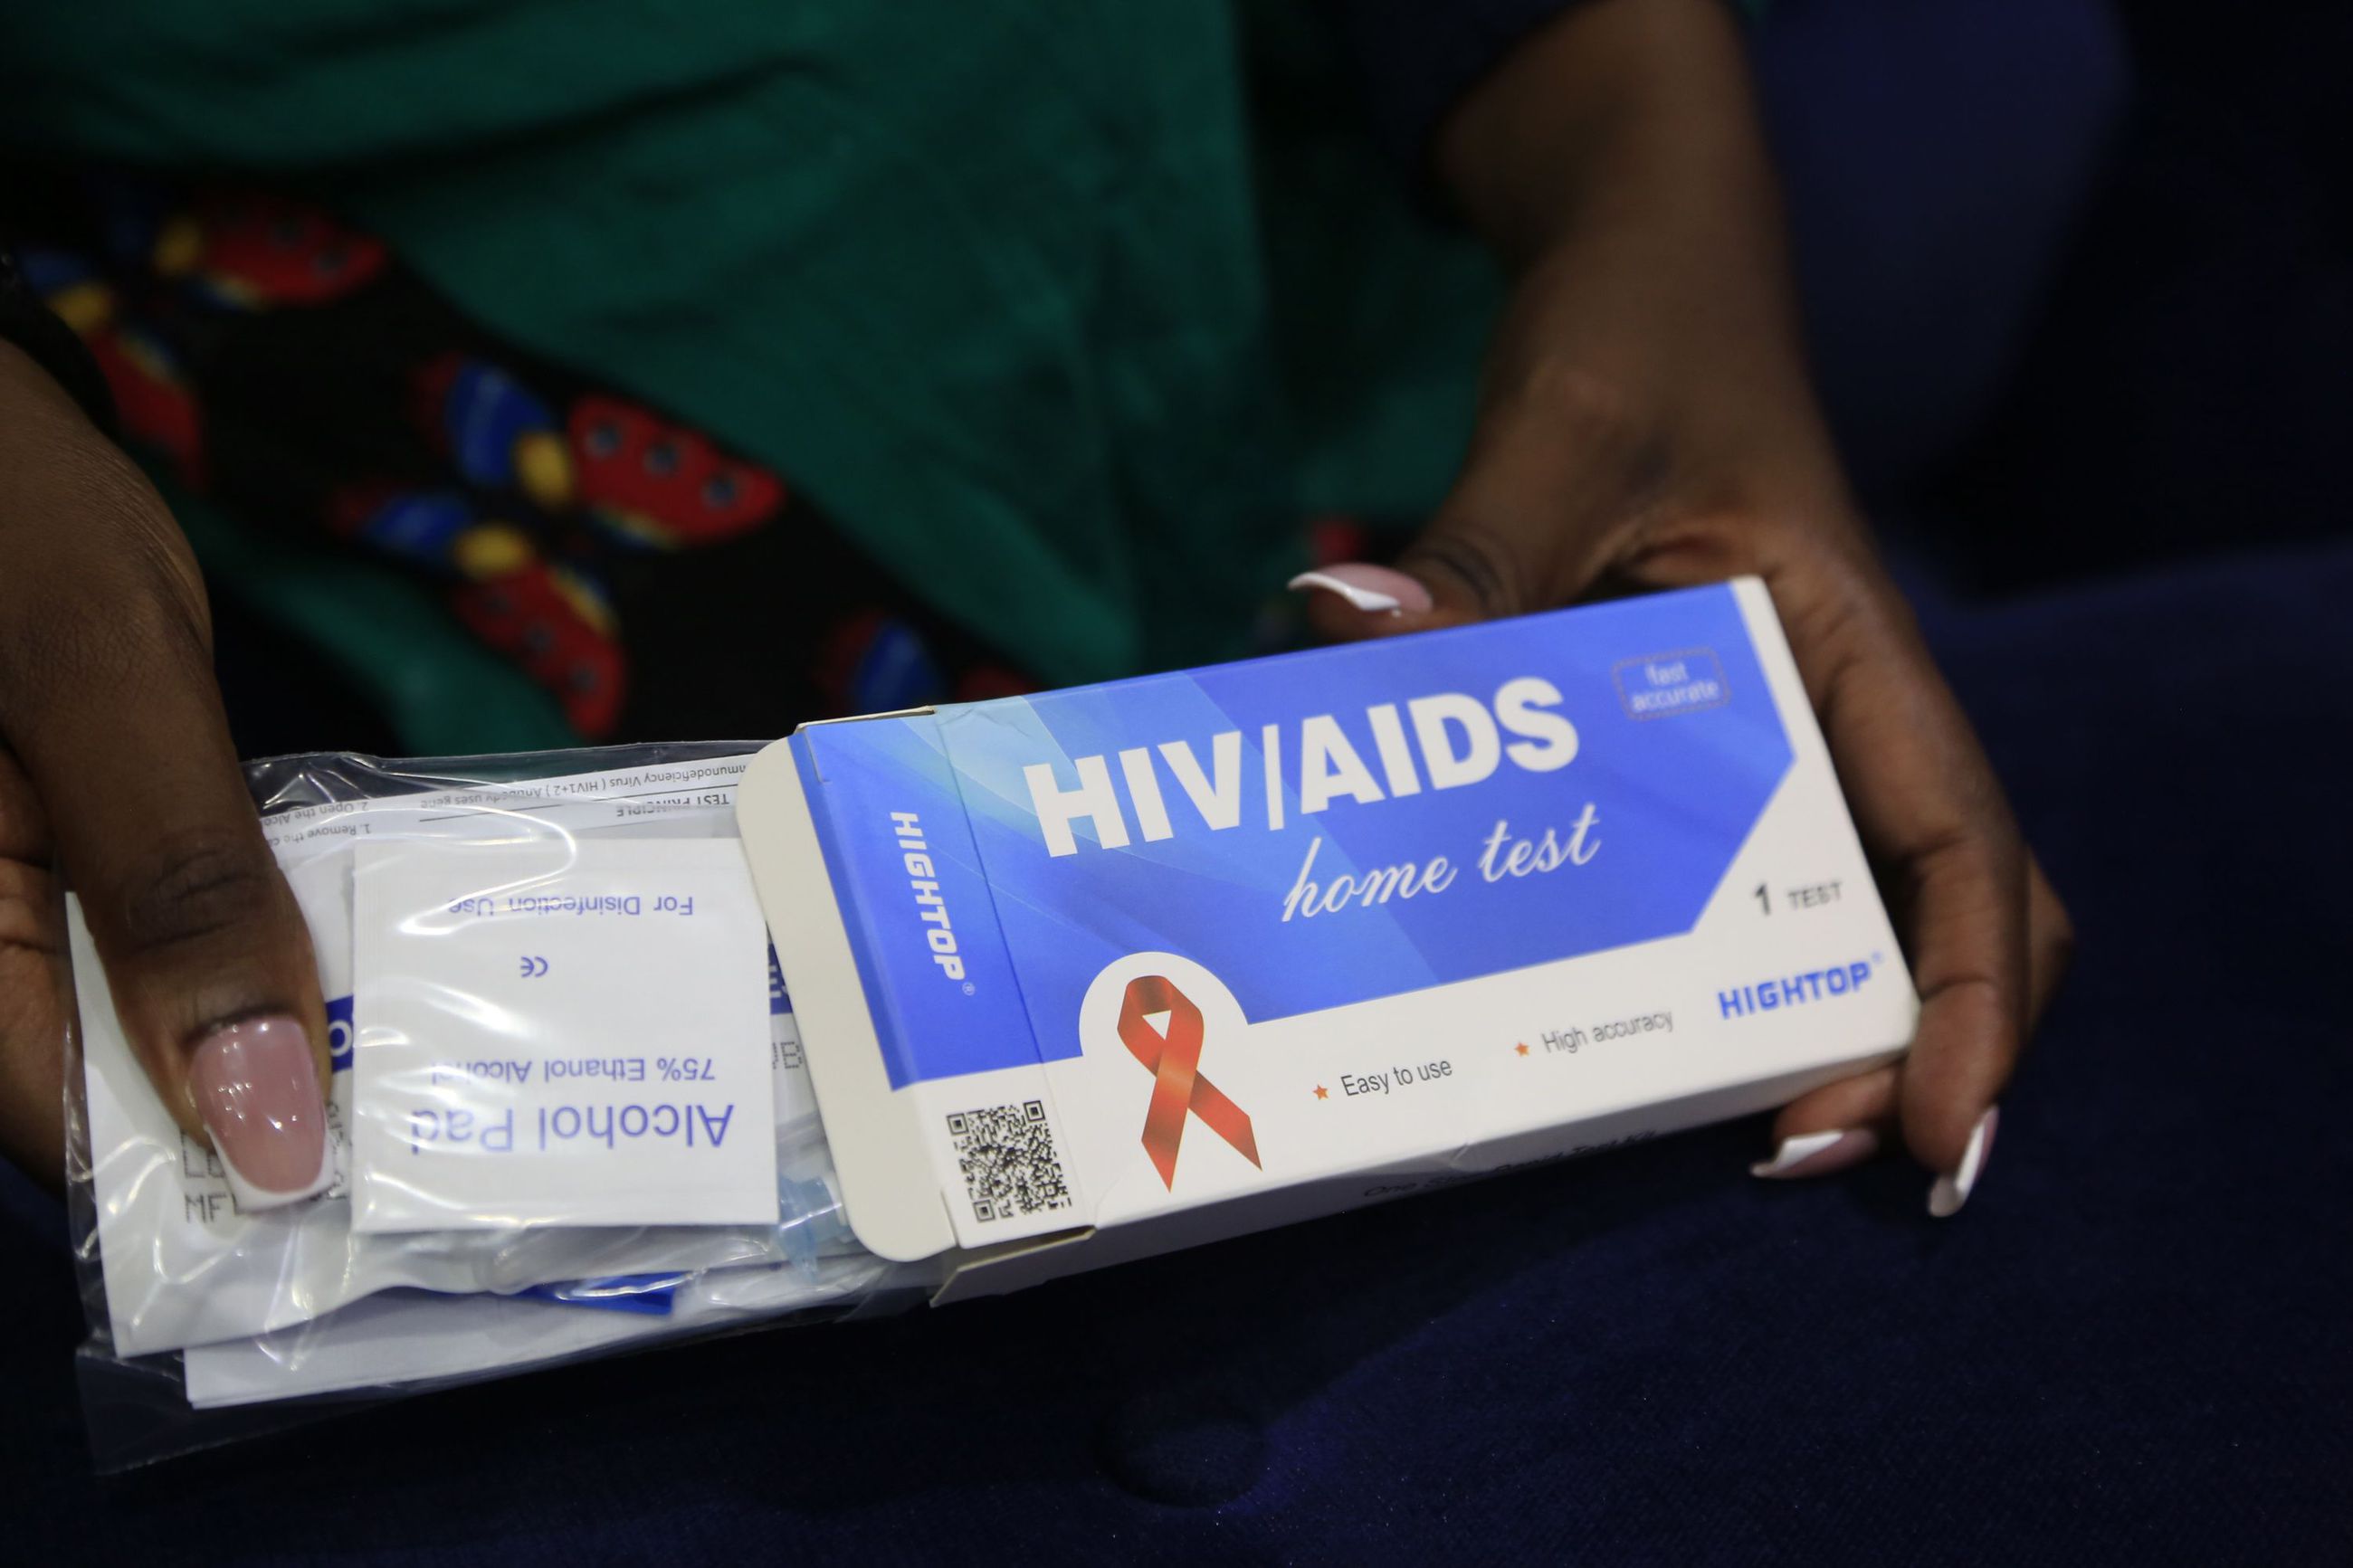 Fifth Person Cured of HIV: A Huge Step towards a World without HIV!